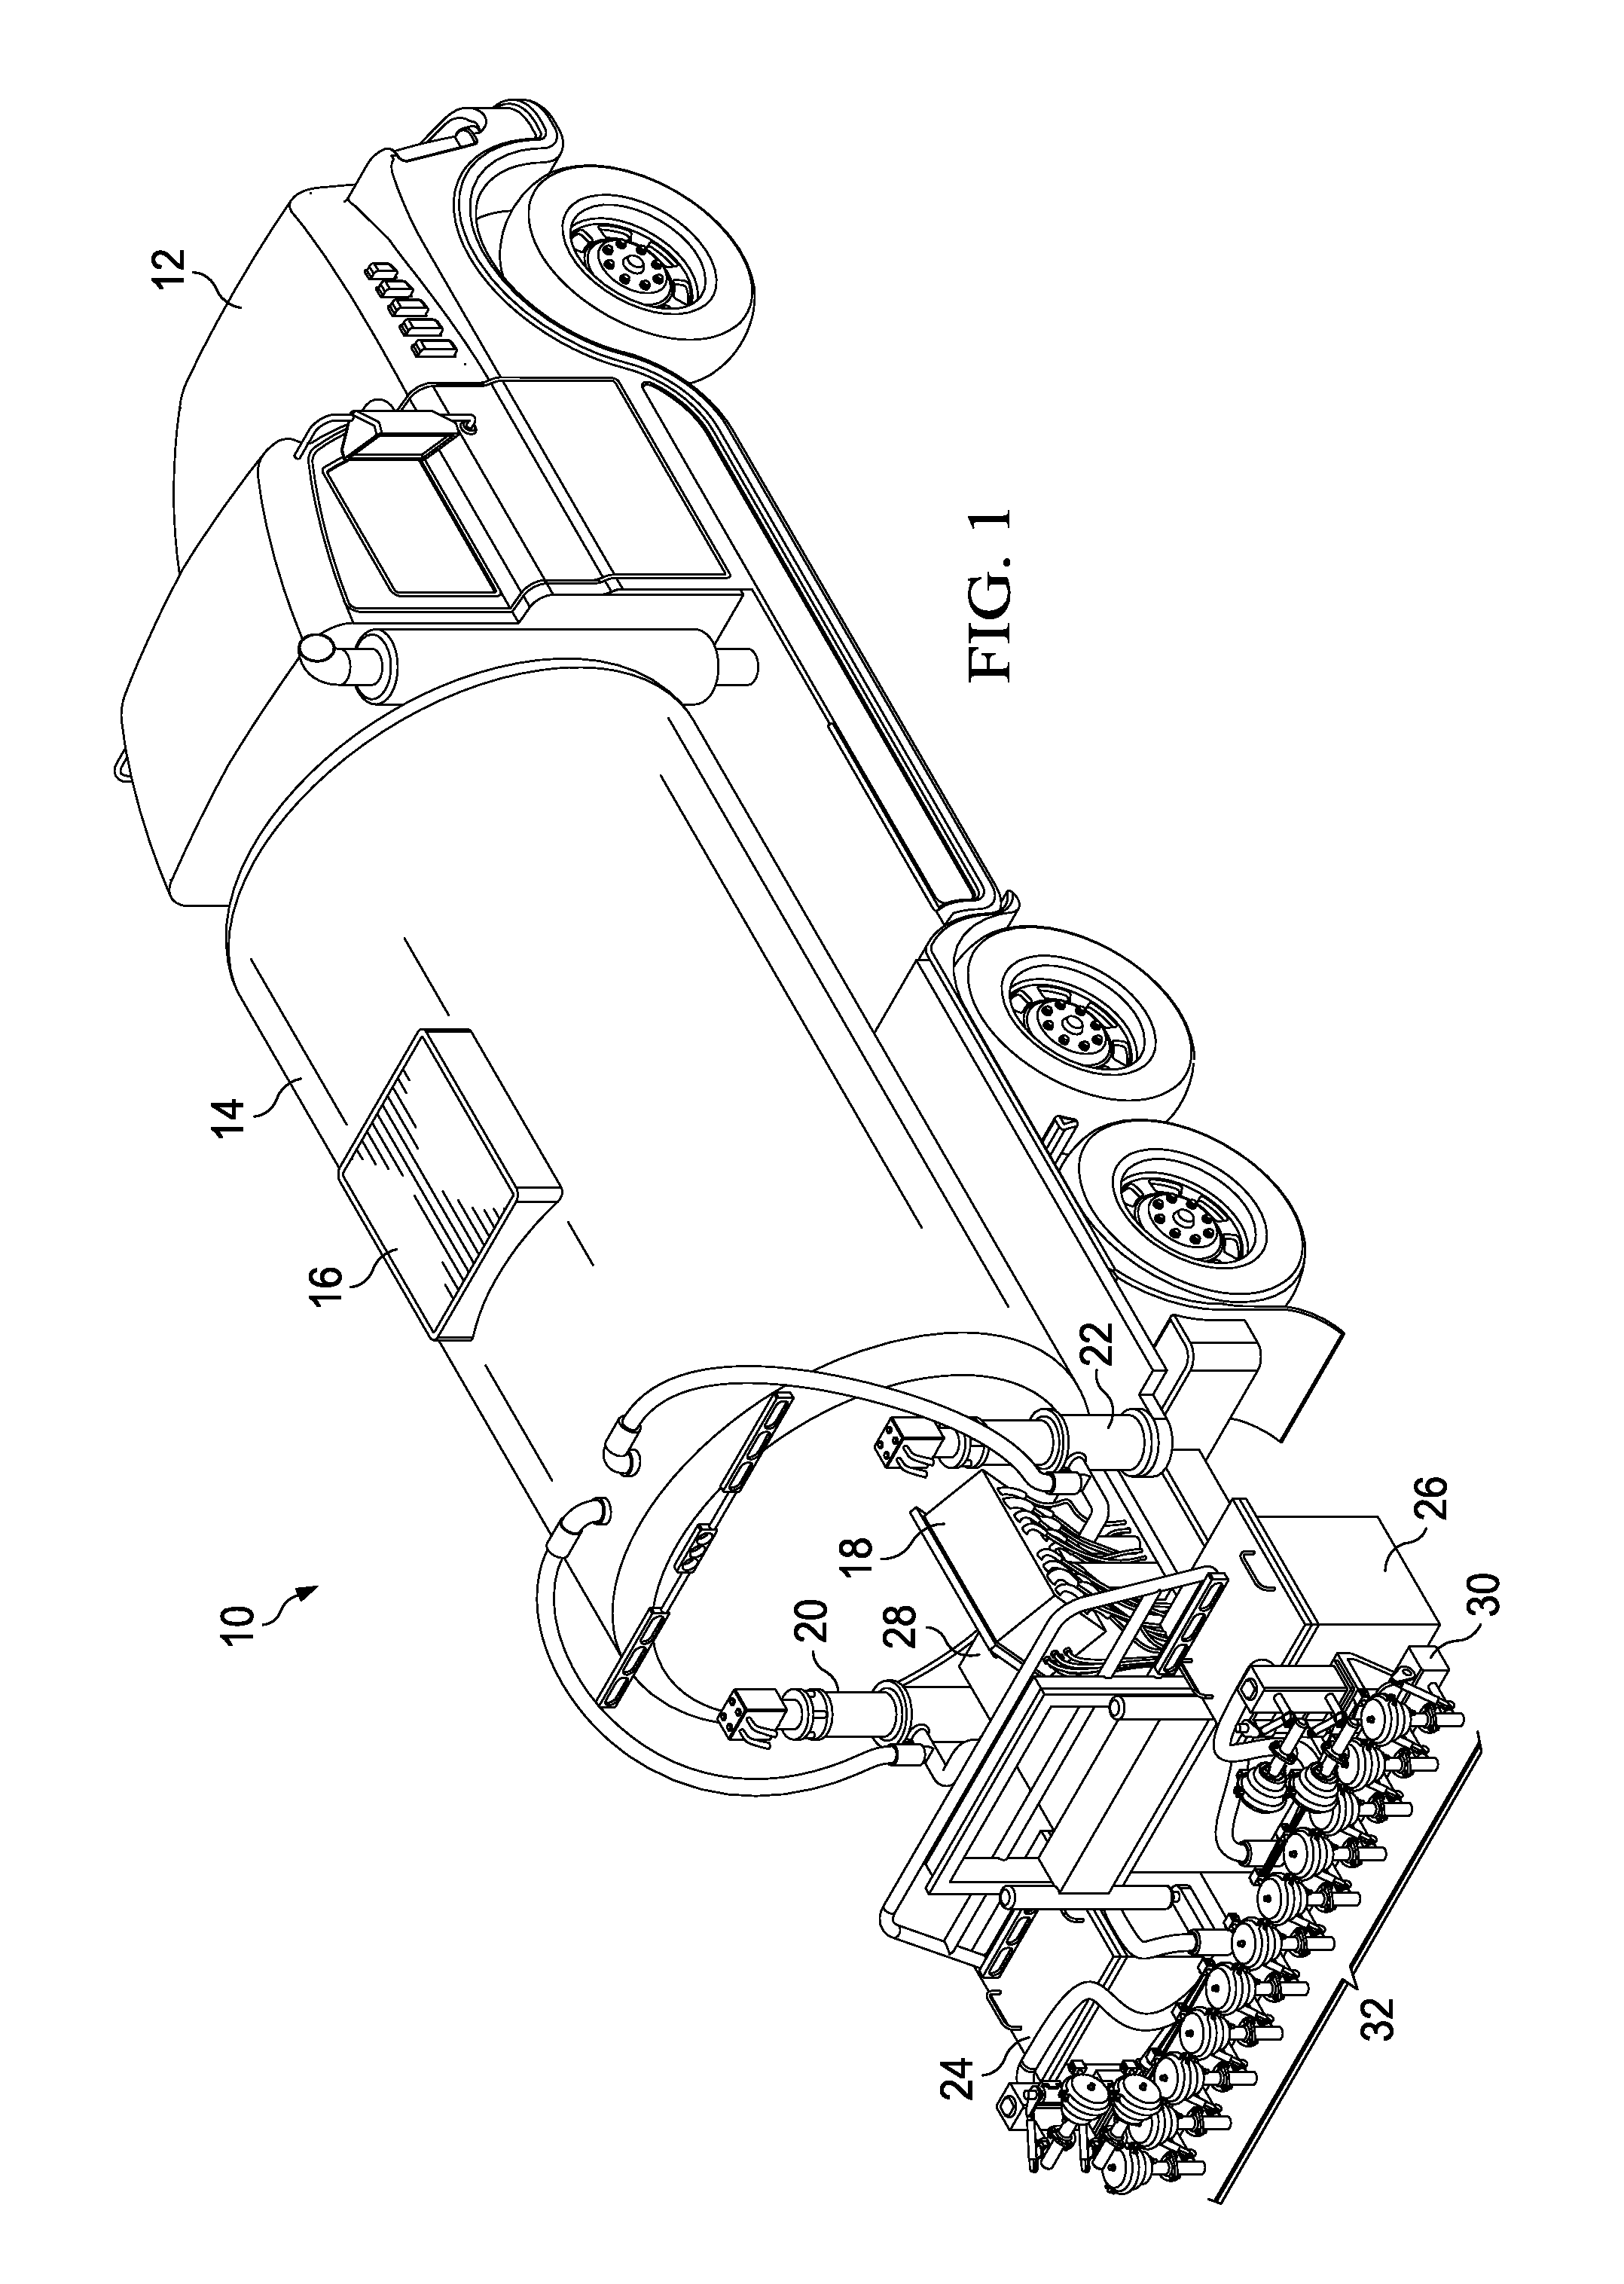 Spray Assembly for Surface Treatment